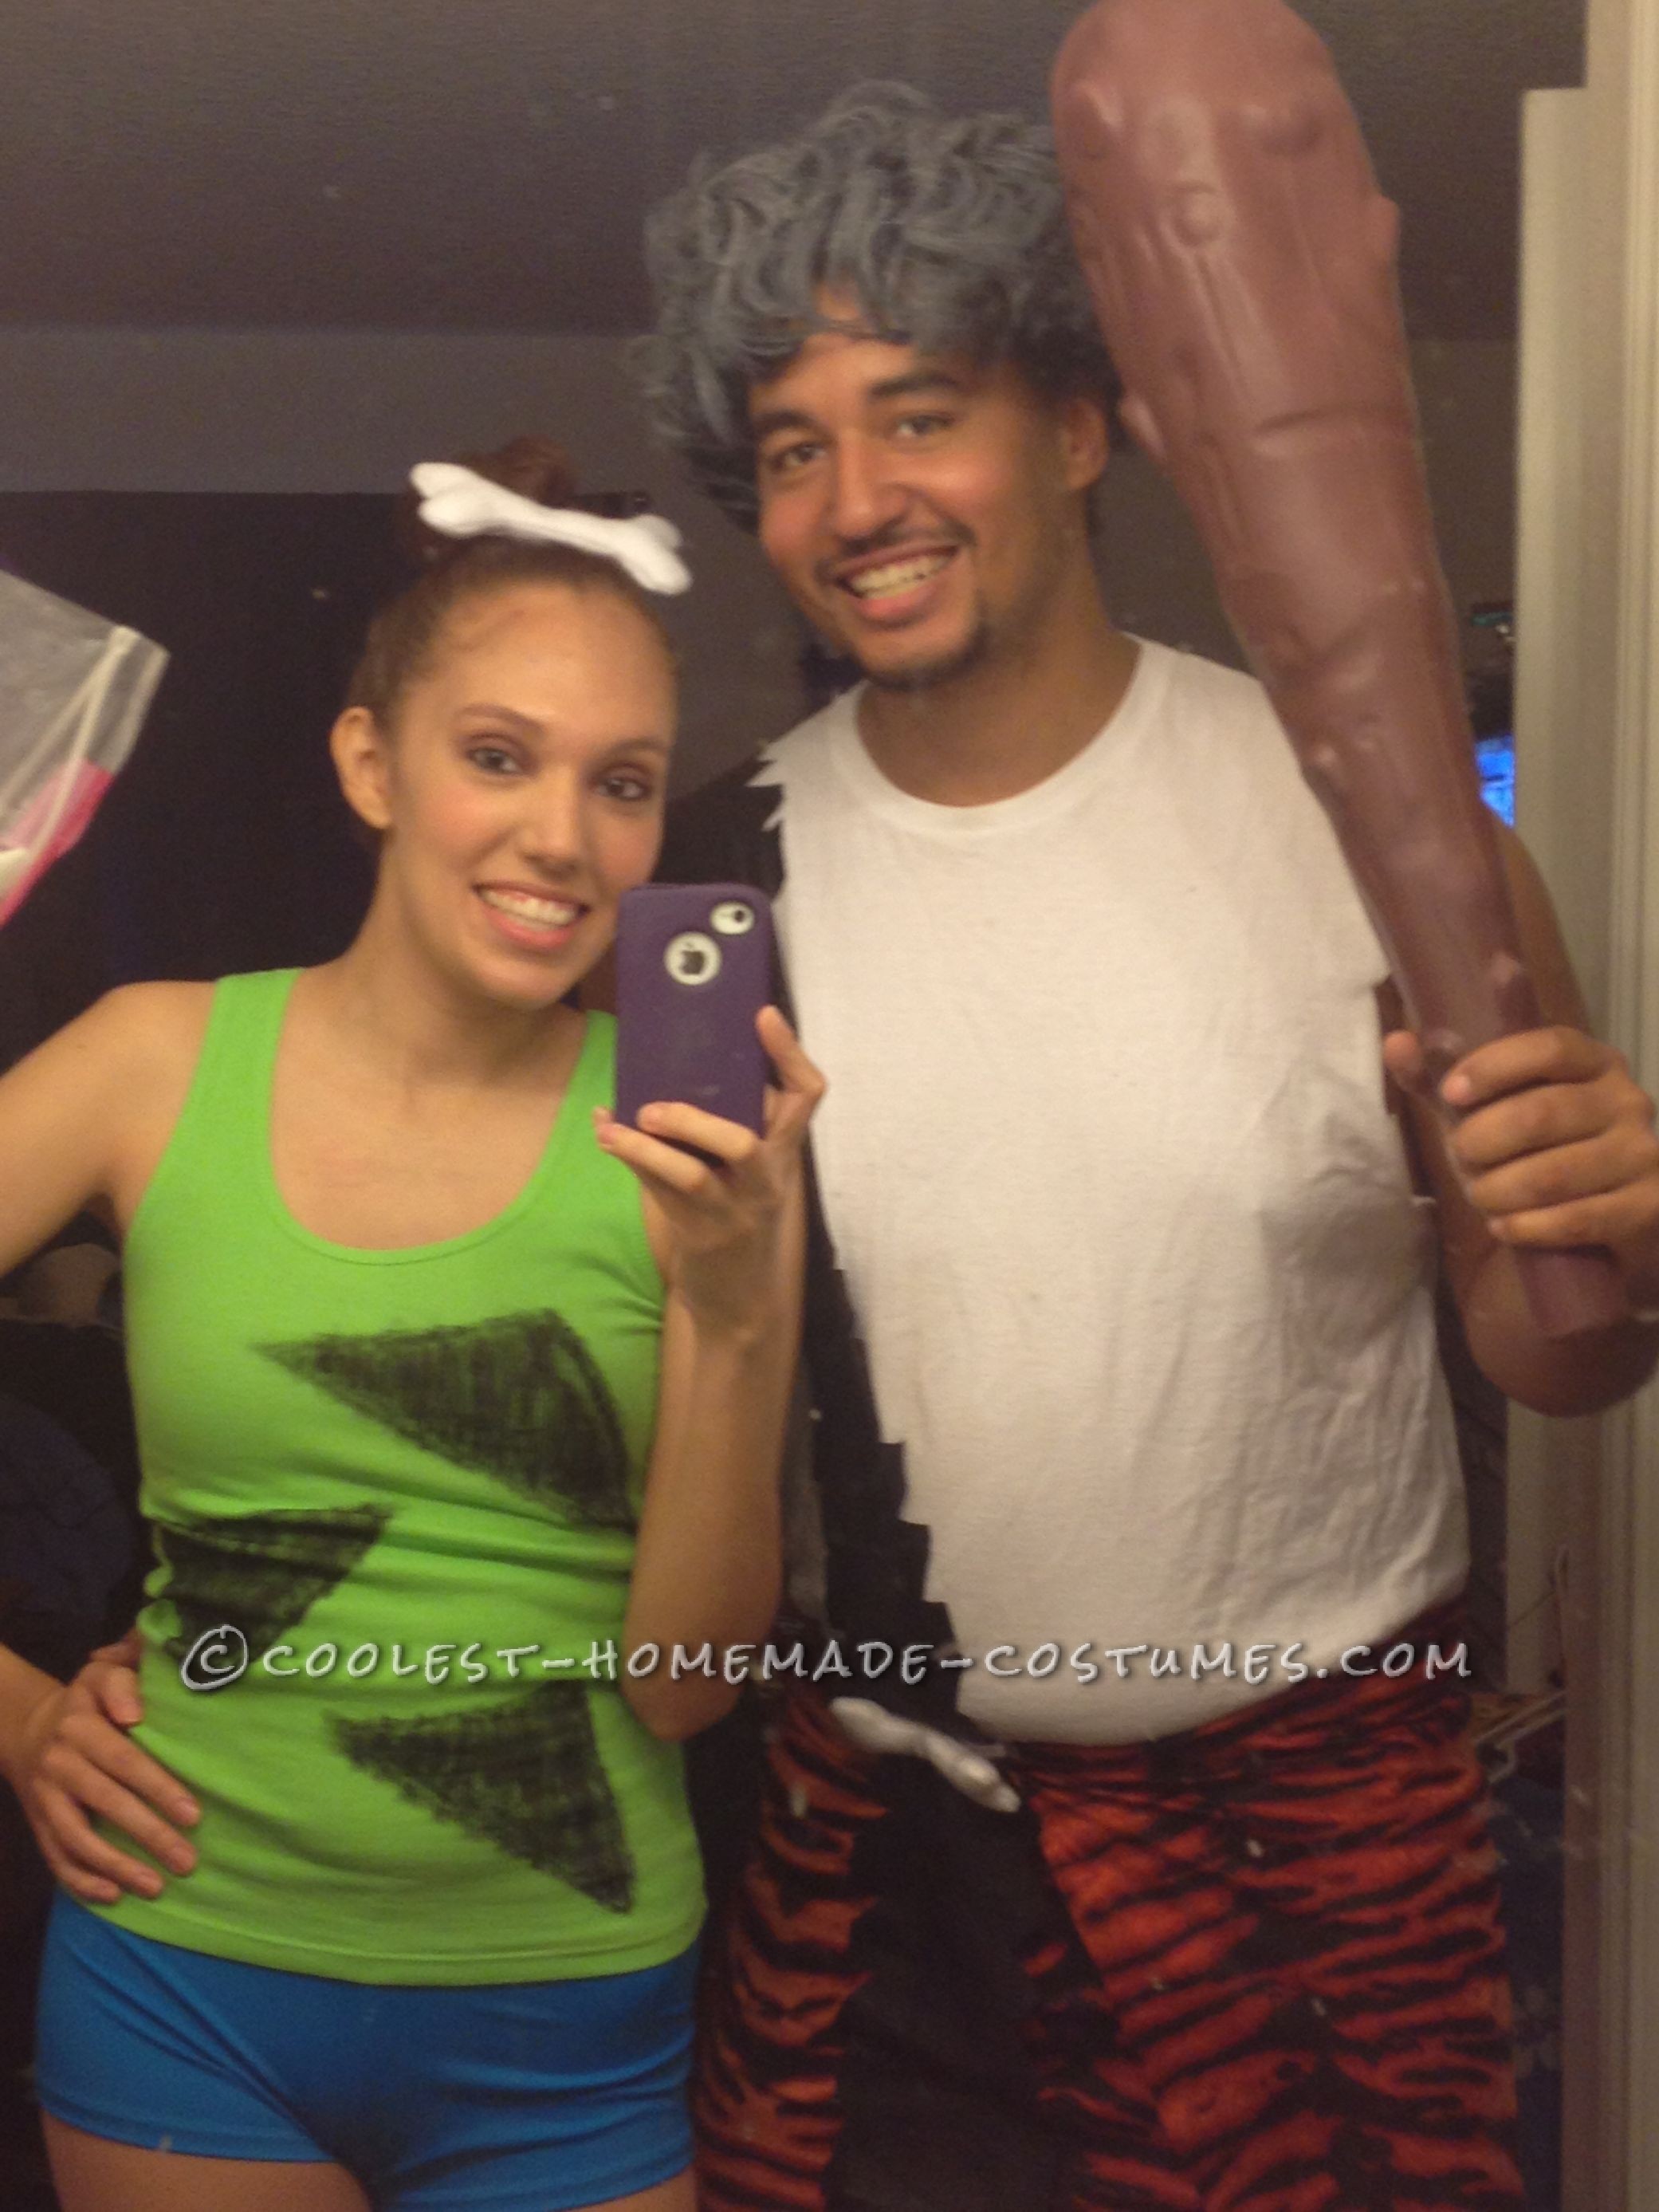 Coolest Pebbles and Bamm Bamm Homemade Halloween Couples Costume: Intro:  This Halloween, I wanted to be Pebbles! I was Pebbles when I was 4 years old but this Halloween I was like “I want to be grown-up Pebbles!